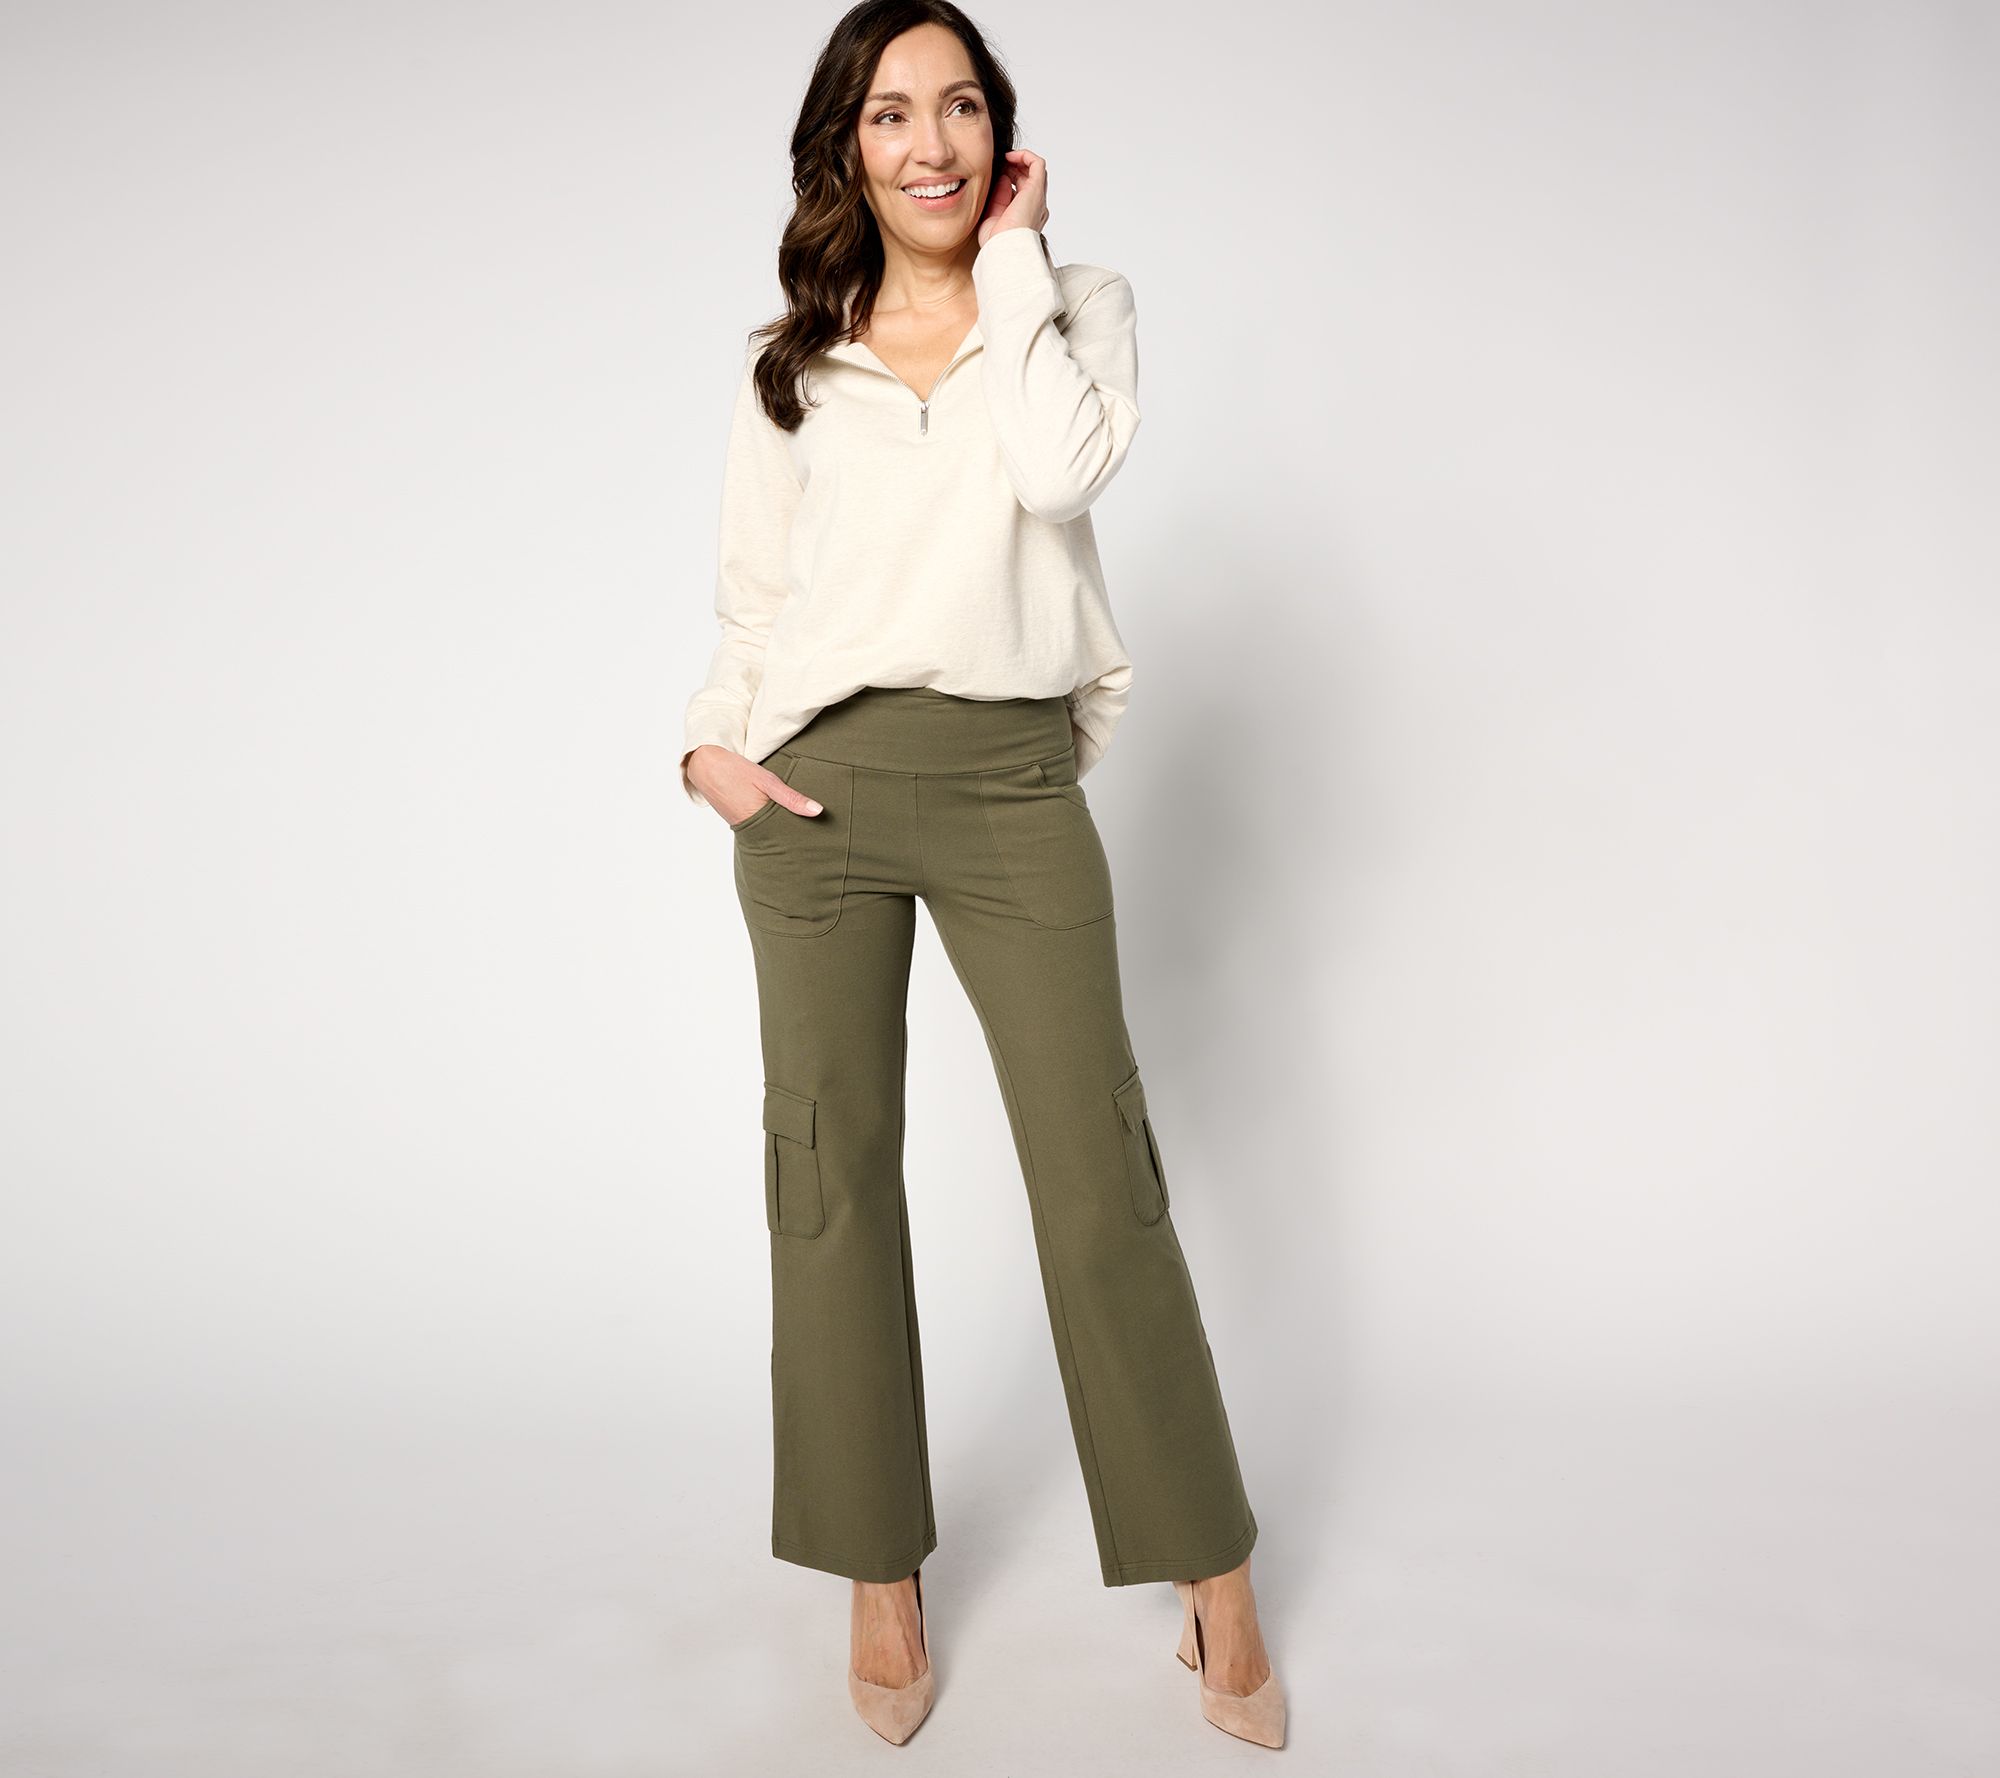 Women with Control Pants by Renee Greenstein - Search Shopping